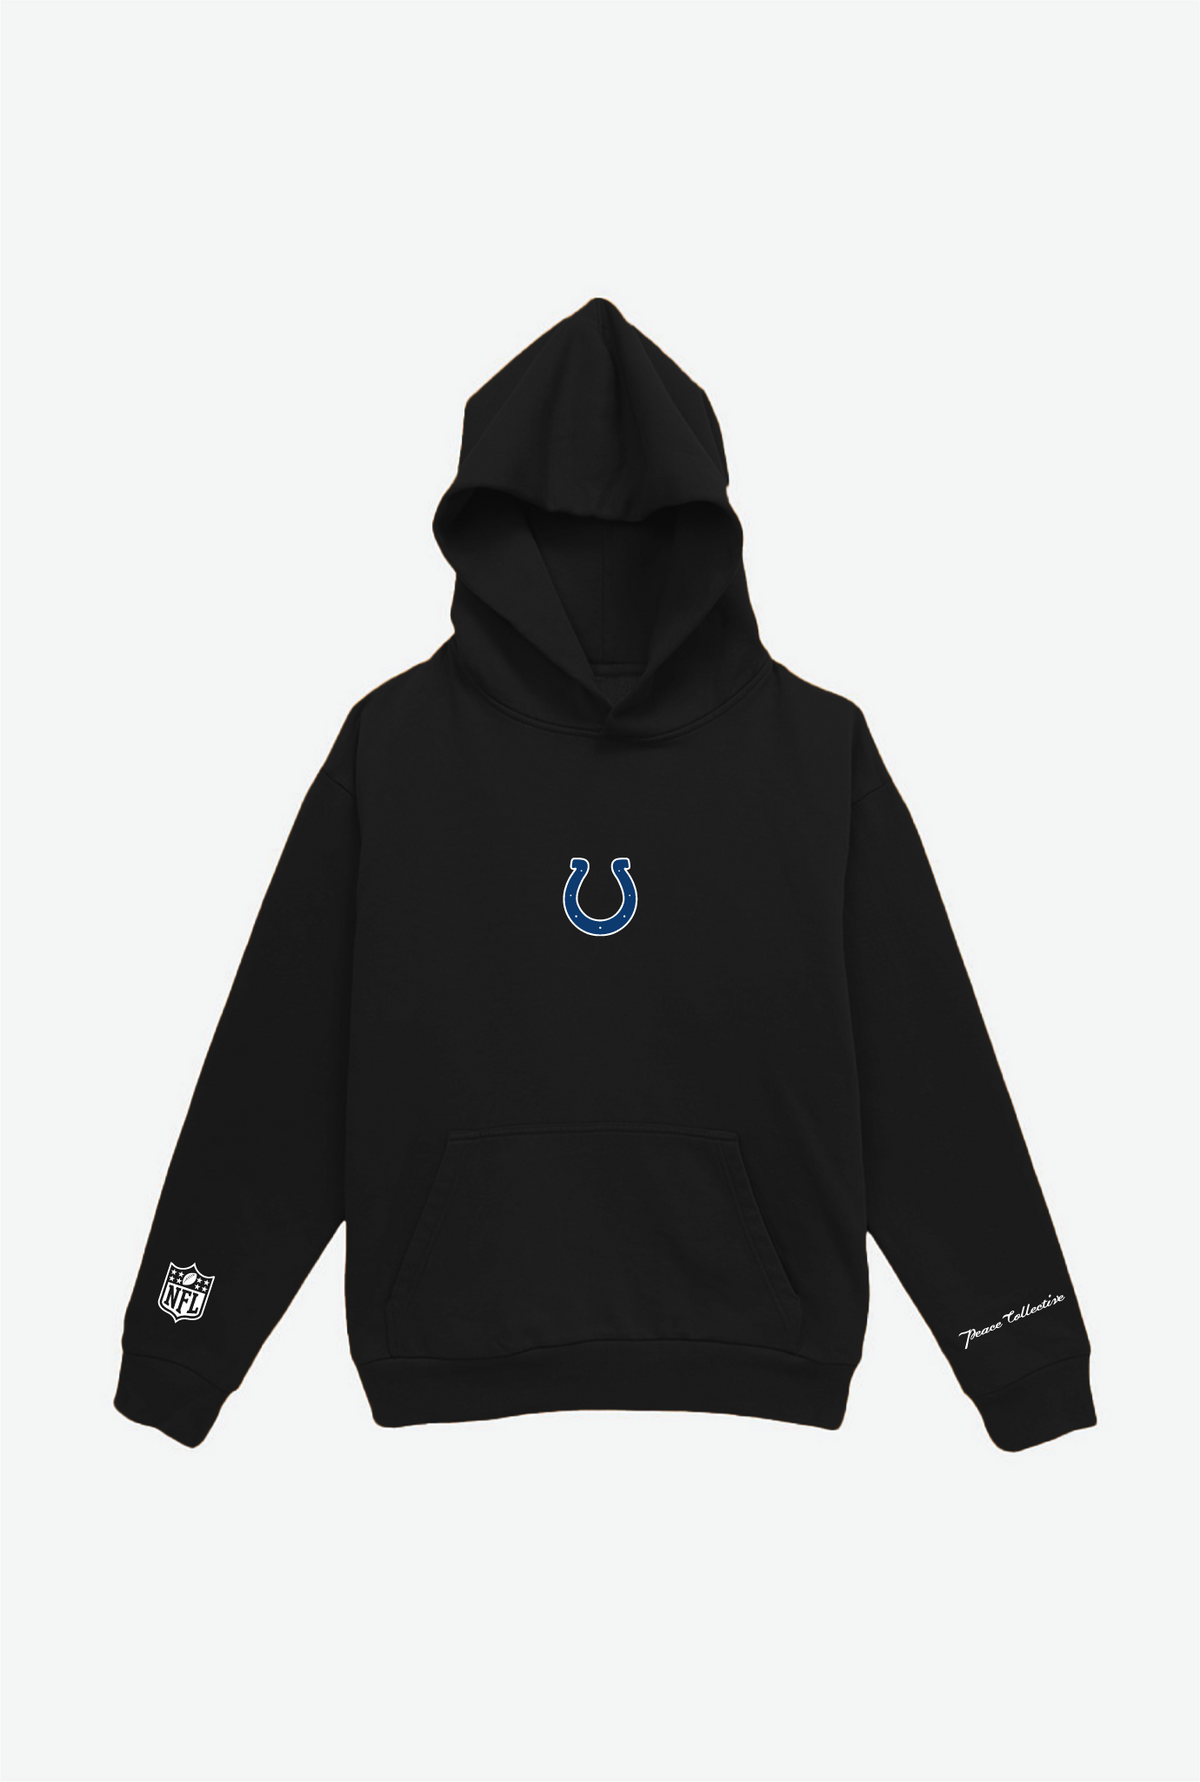 Indianapolis Colts Logo Heavyweight Hoodie - Black